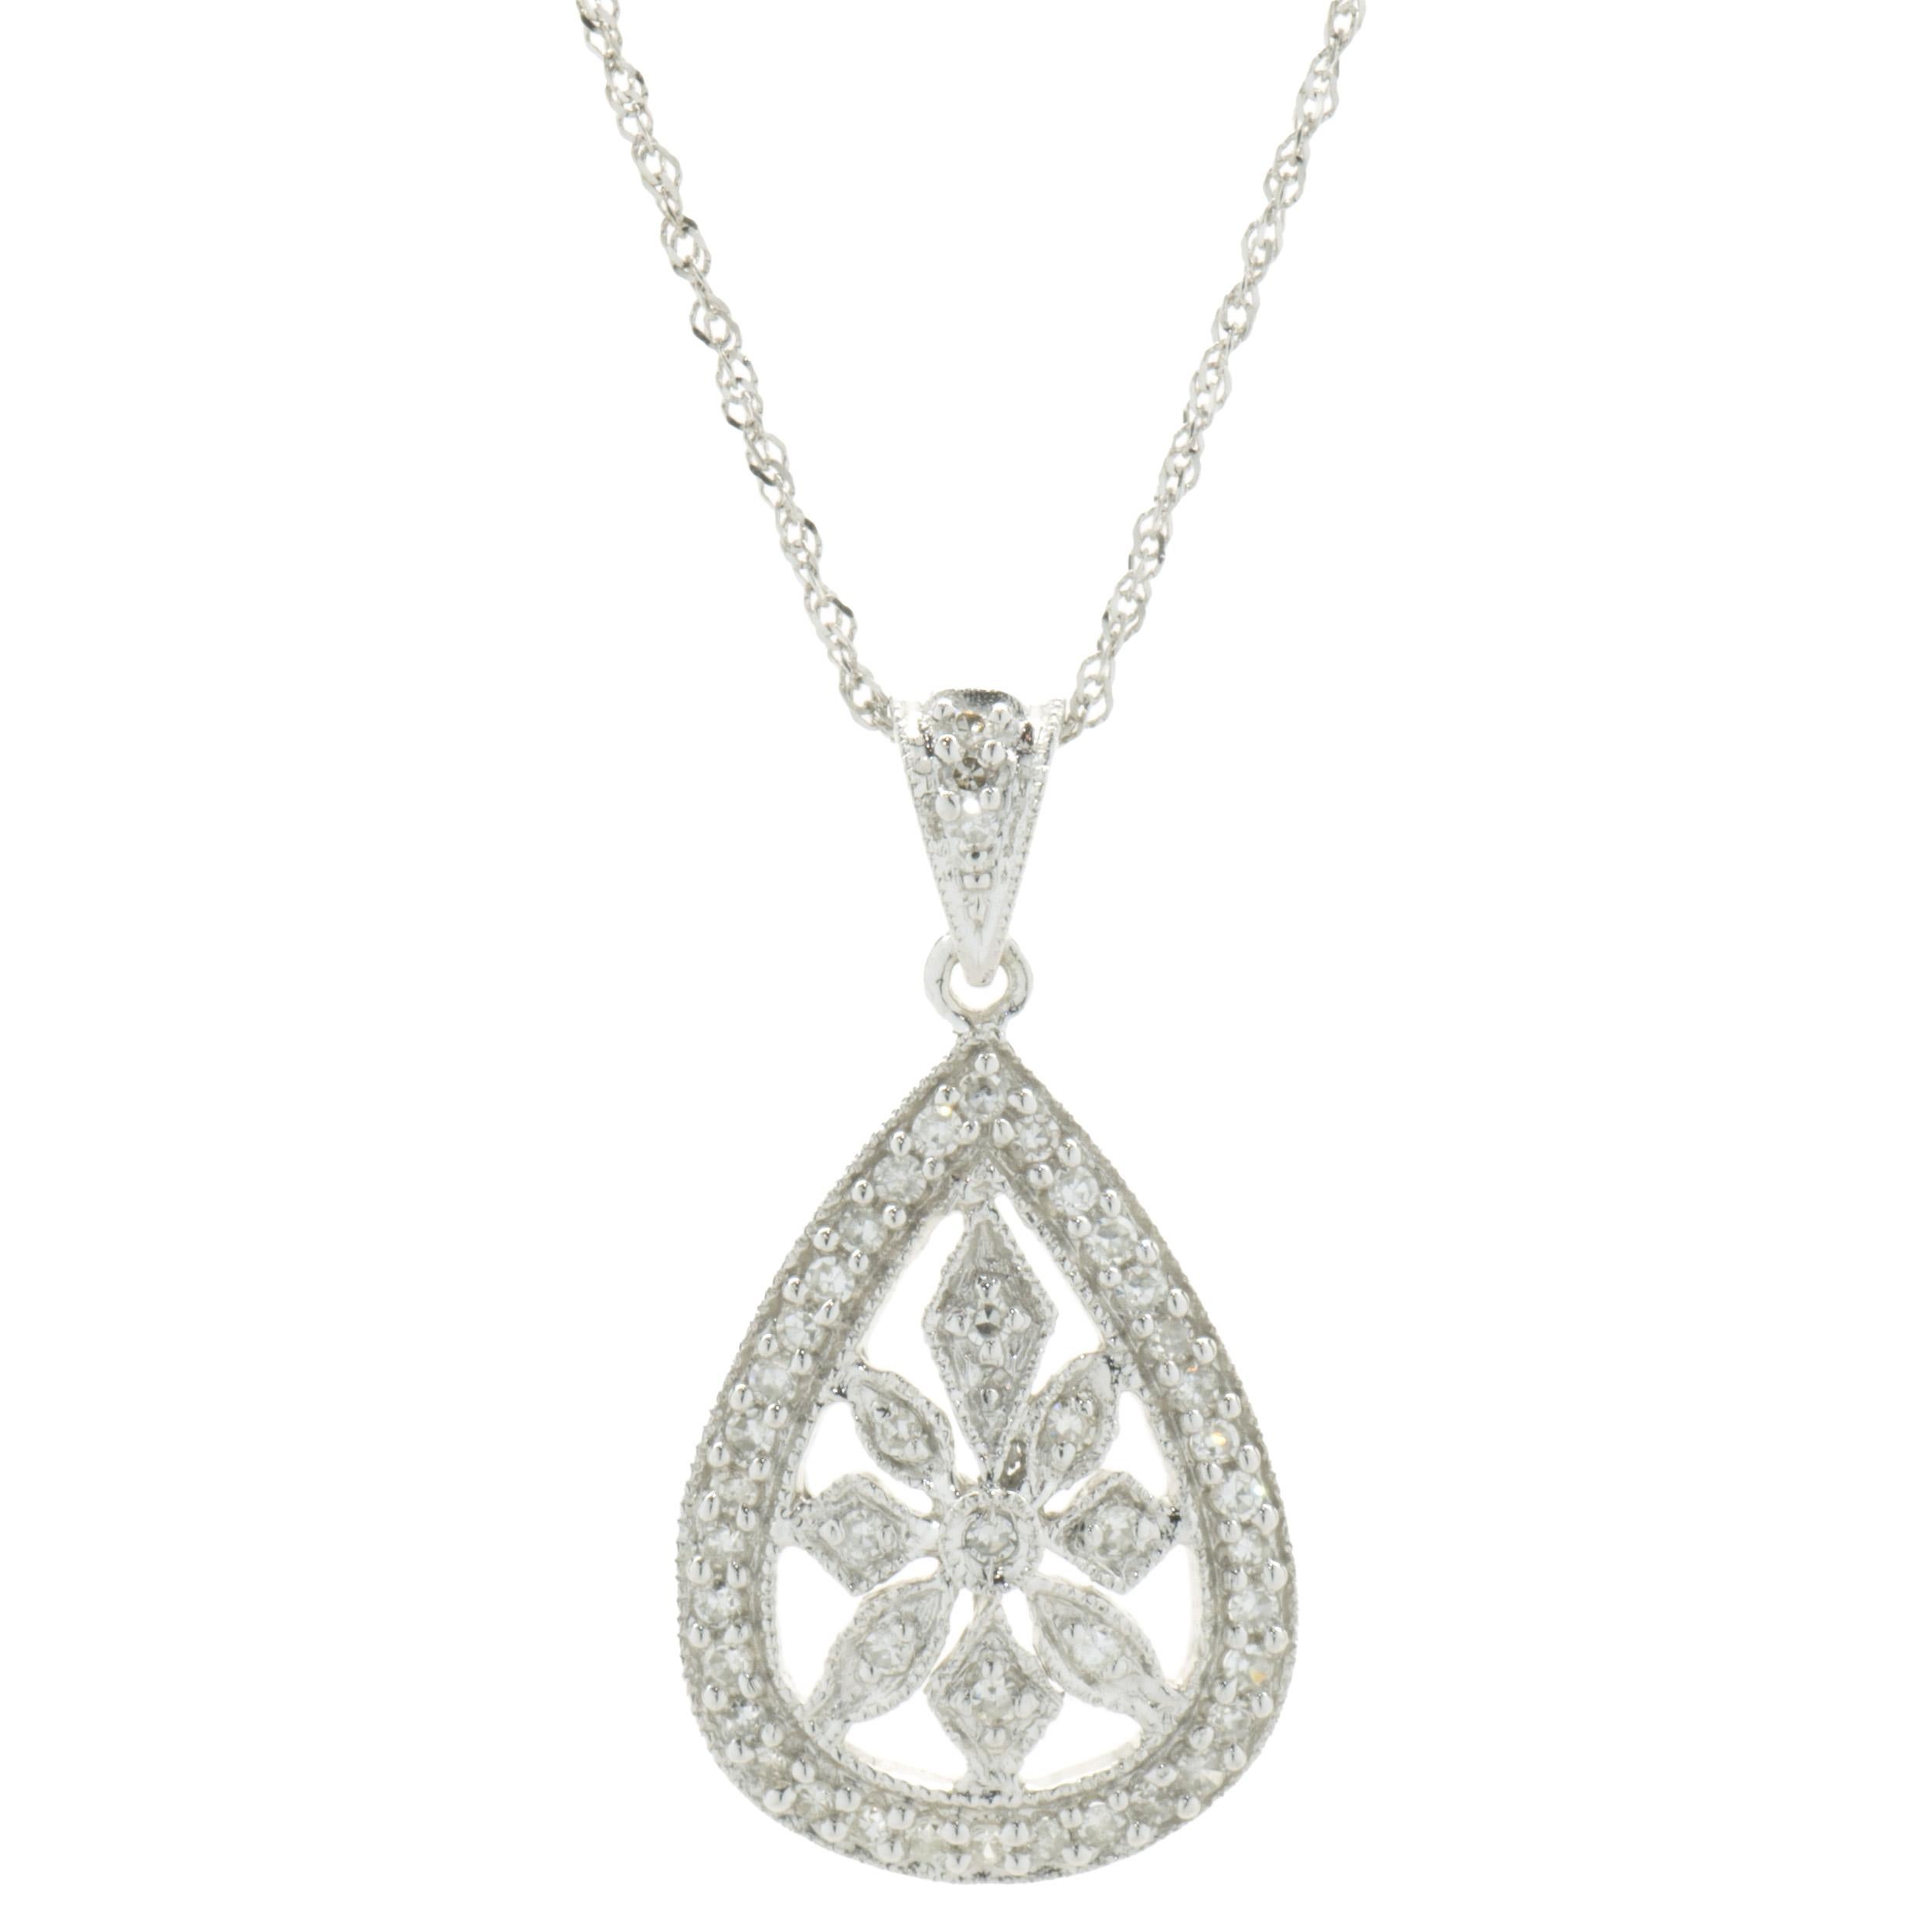 Designer: custom
Material: 14K white gold
Diamonds: 44 round cut = 0.44cttw
Color: H
Clarity: SI1
Dimensions: necklace measures 18-inches in length 
Weight: 2.53 grams